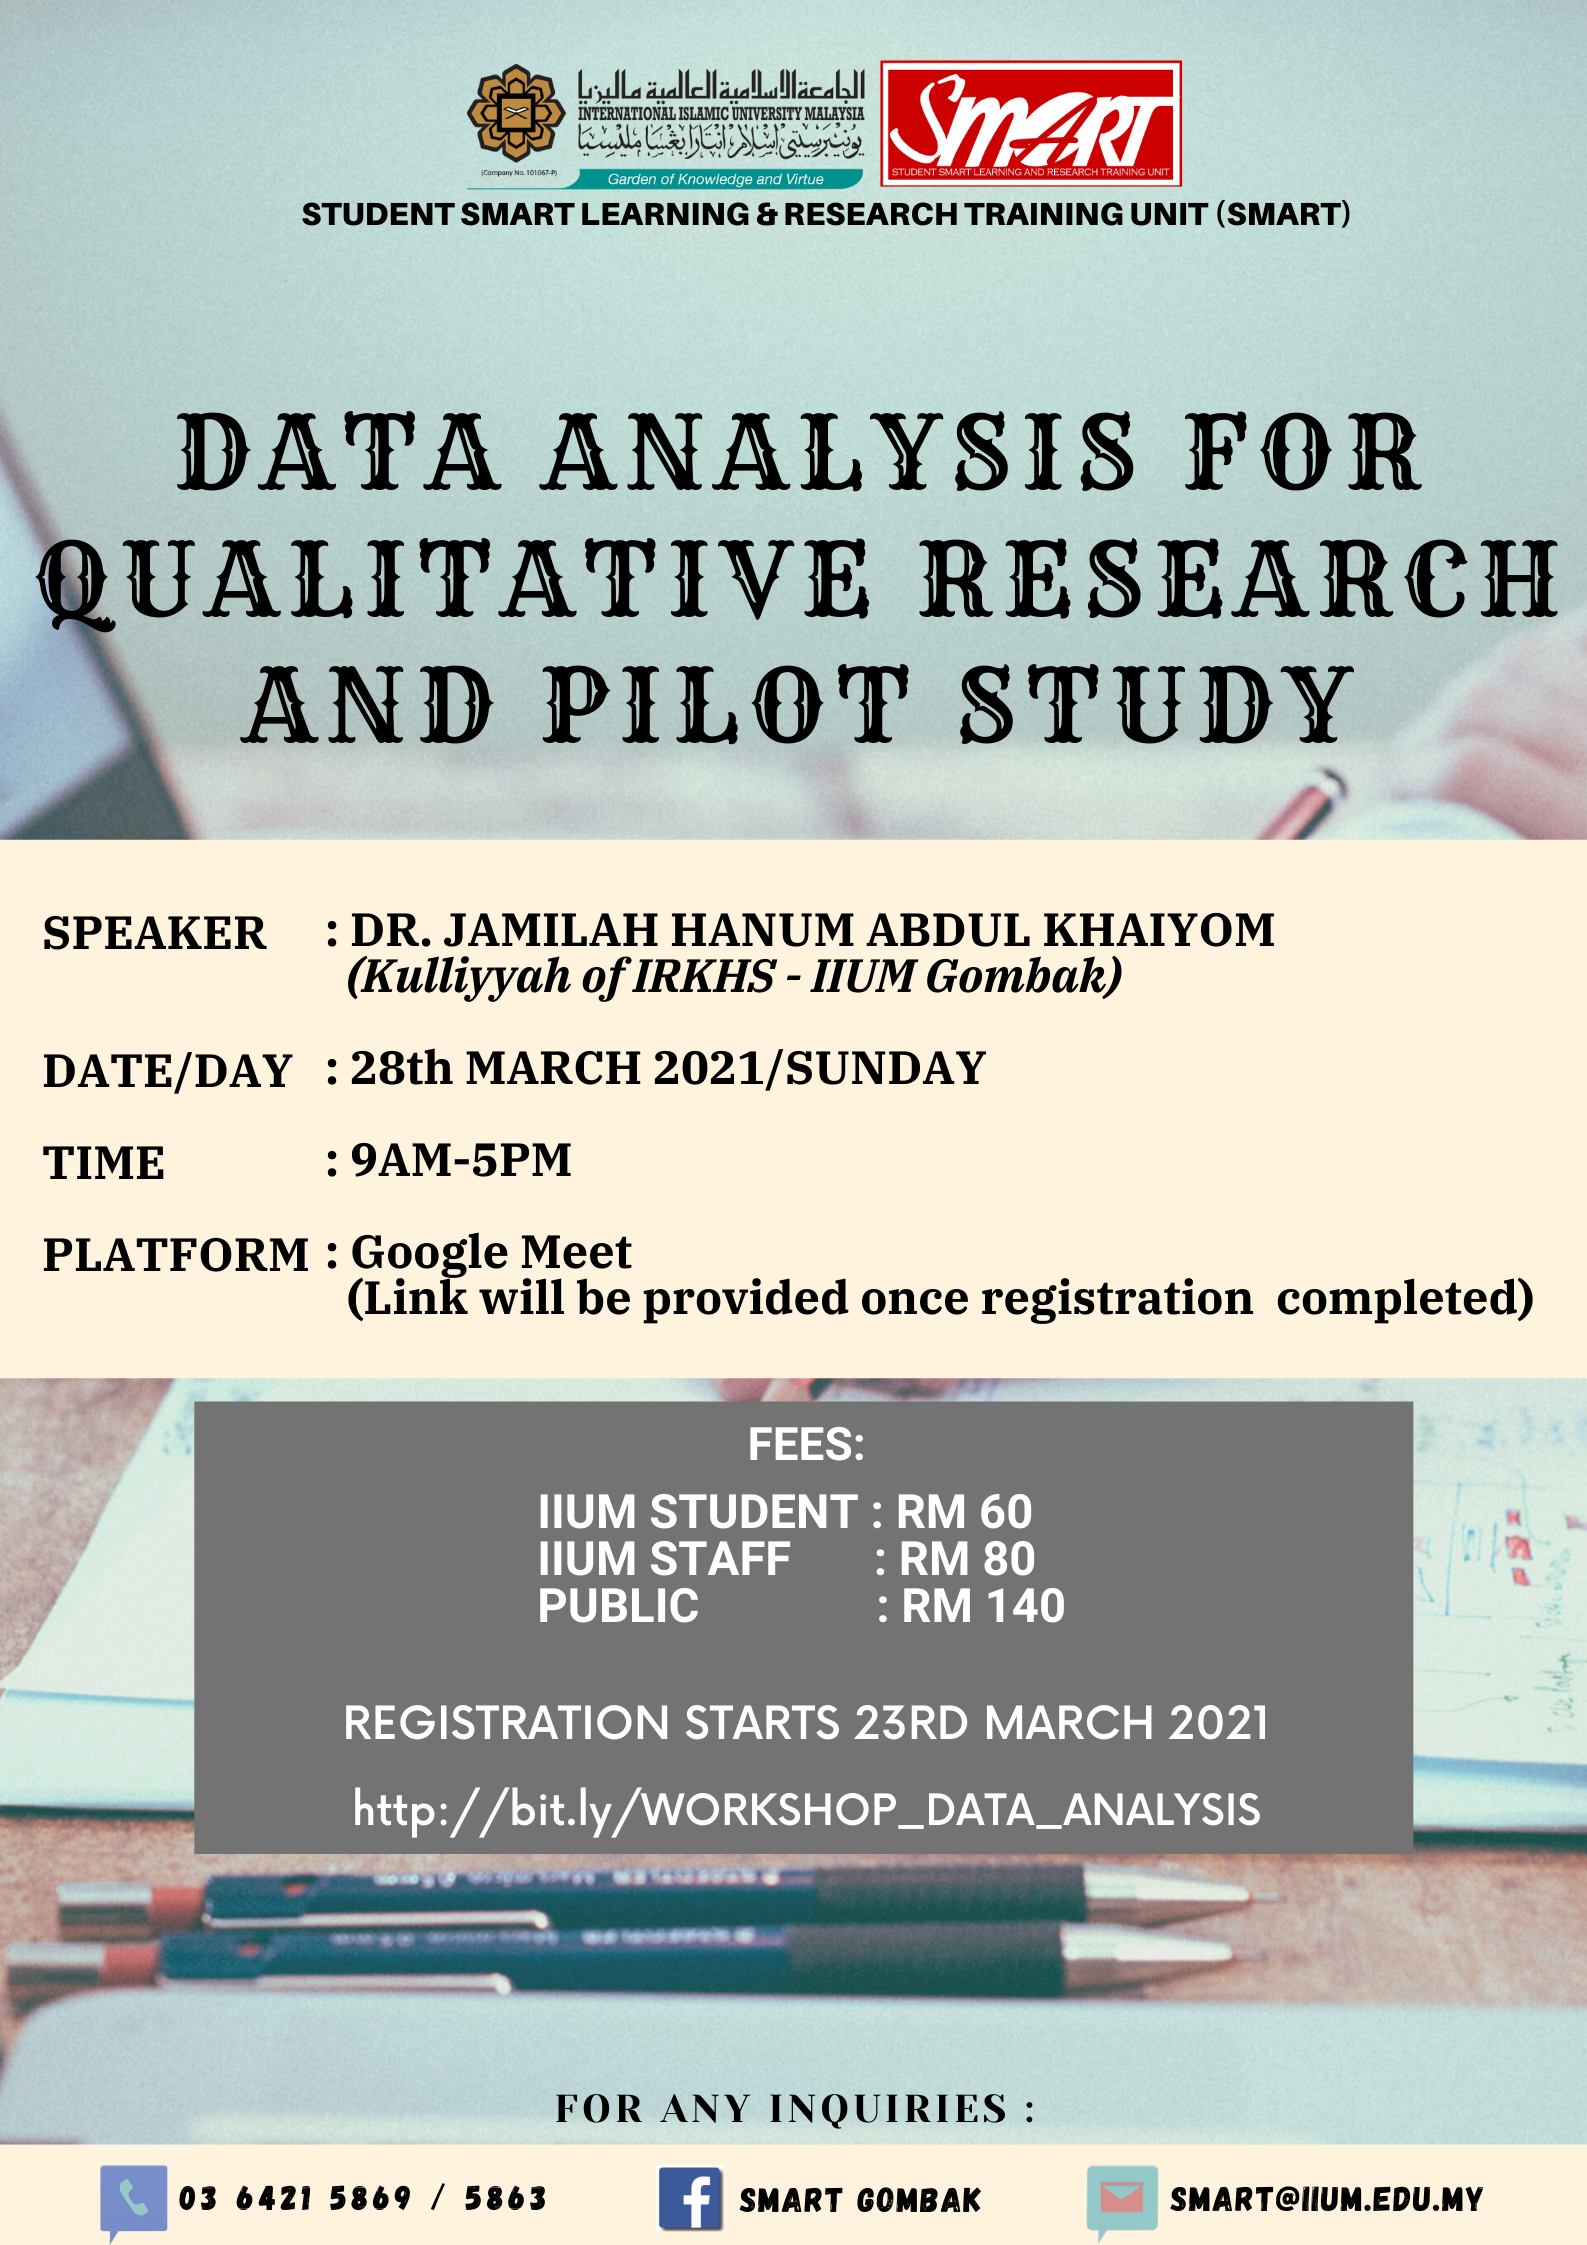 WORKSHOP : DATA ANALYSIS FOR QUALITATIVE RESEARCH AND PILOT STUDY